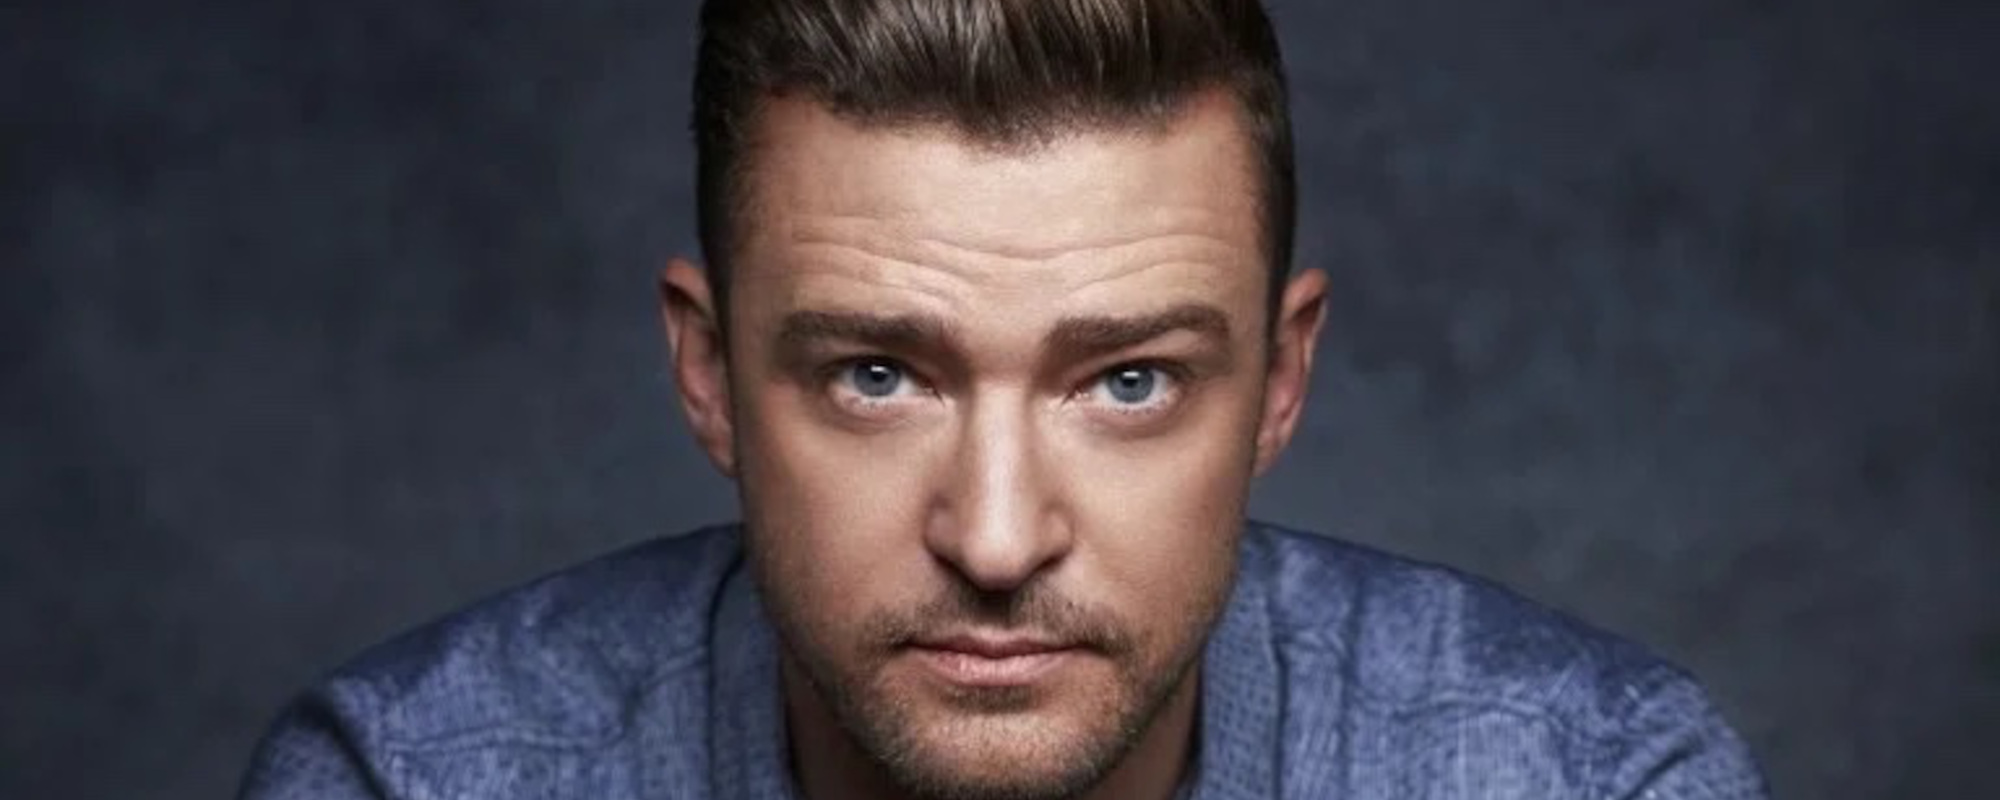 Justin Timberlake Sued Over Never-Released Film Around His ‘The 20/20 Experience’ Album